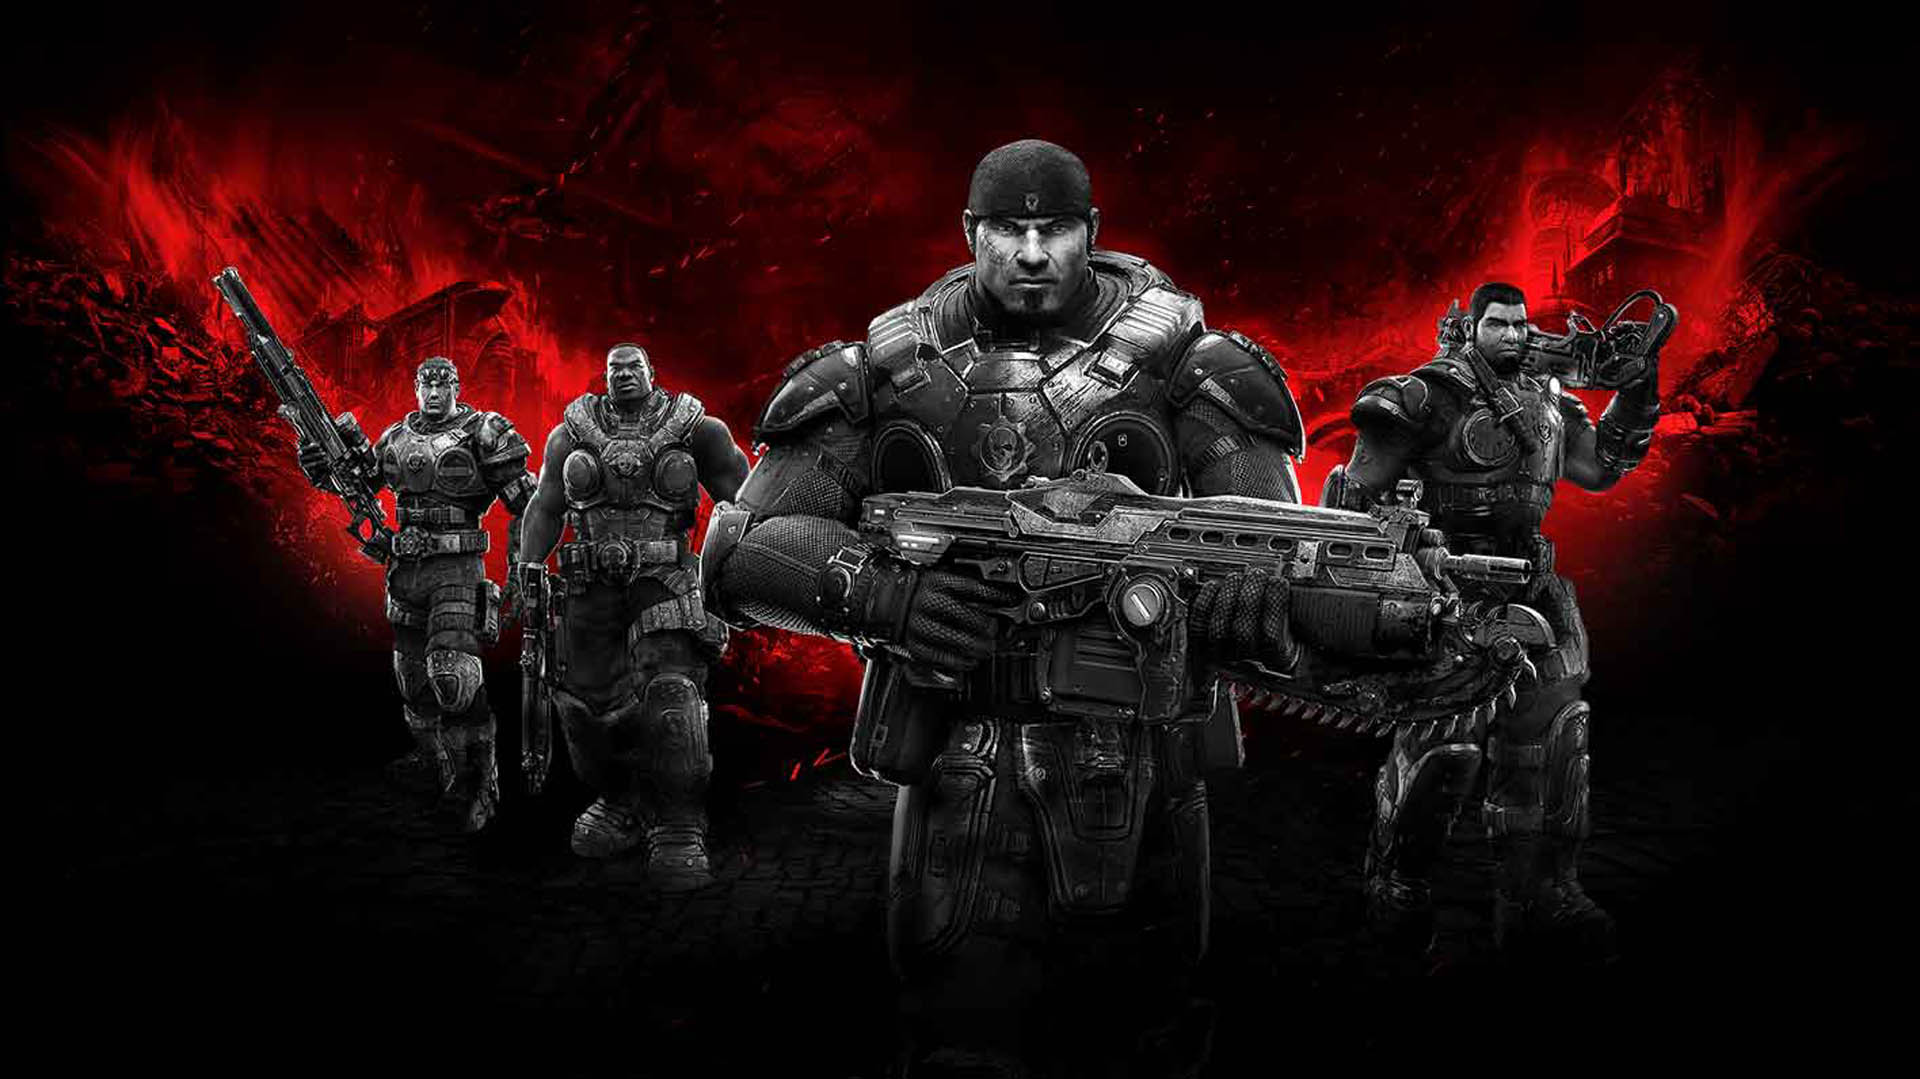 Gears of War: Ultimate Edition” Comes With Entire “Gears